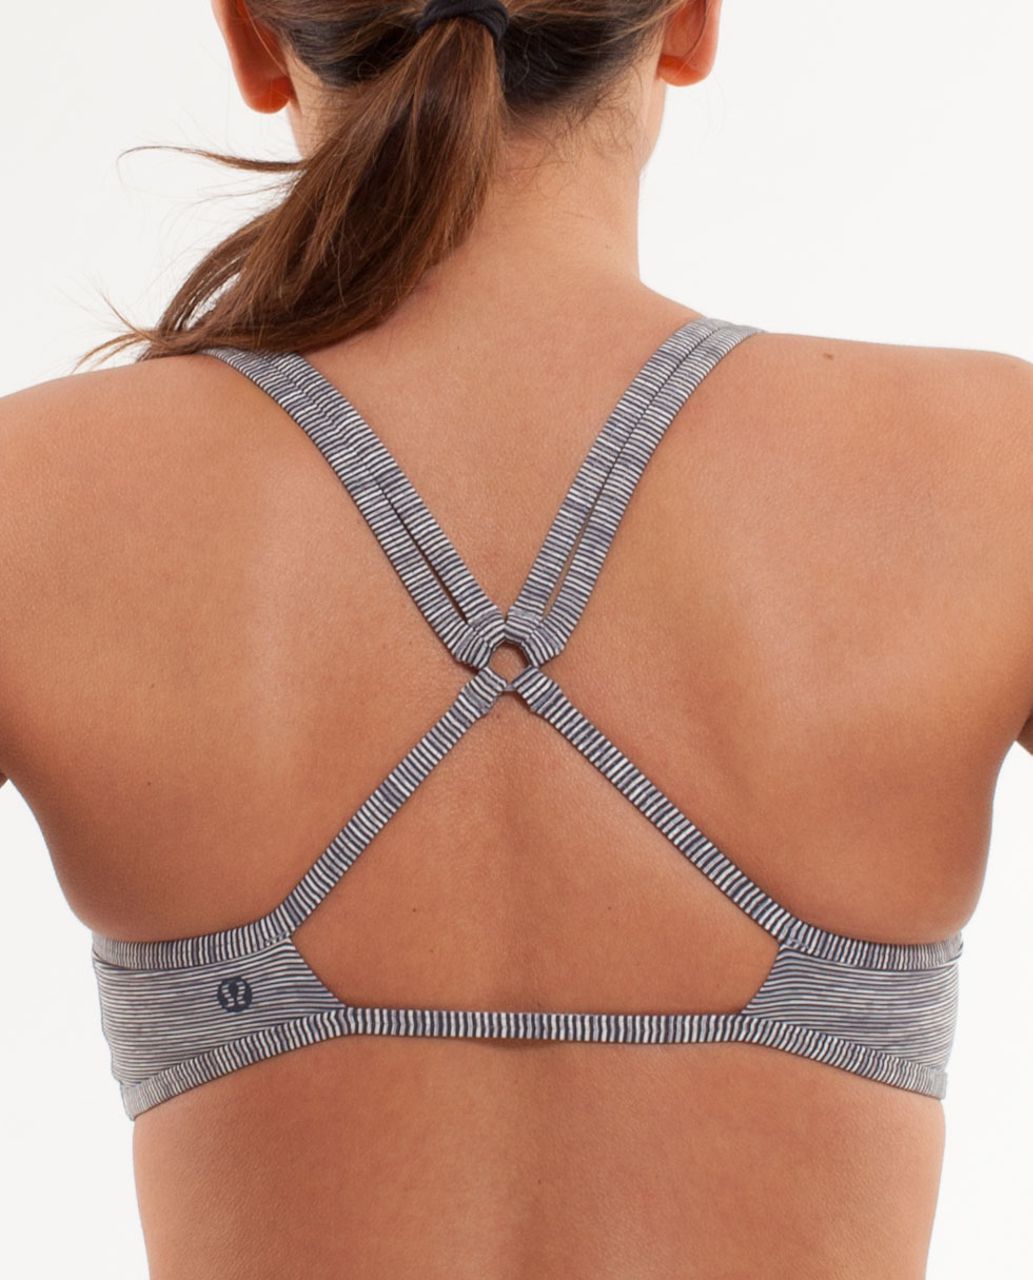 Lululemon Centered Energy Bra - Wee Are From Space Coal Fossil